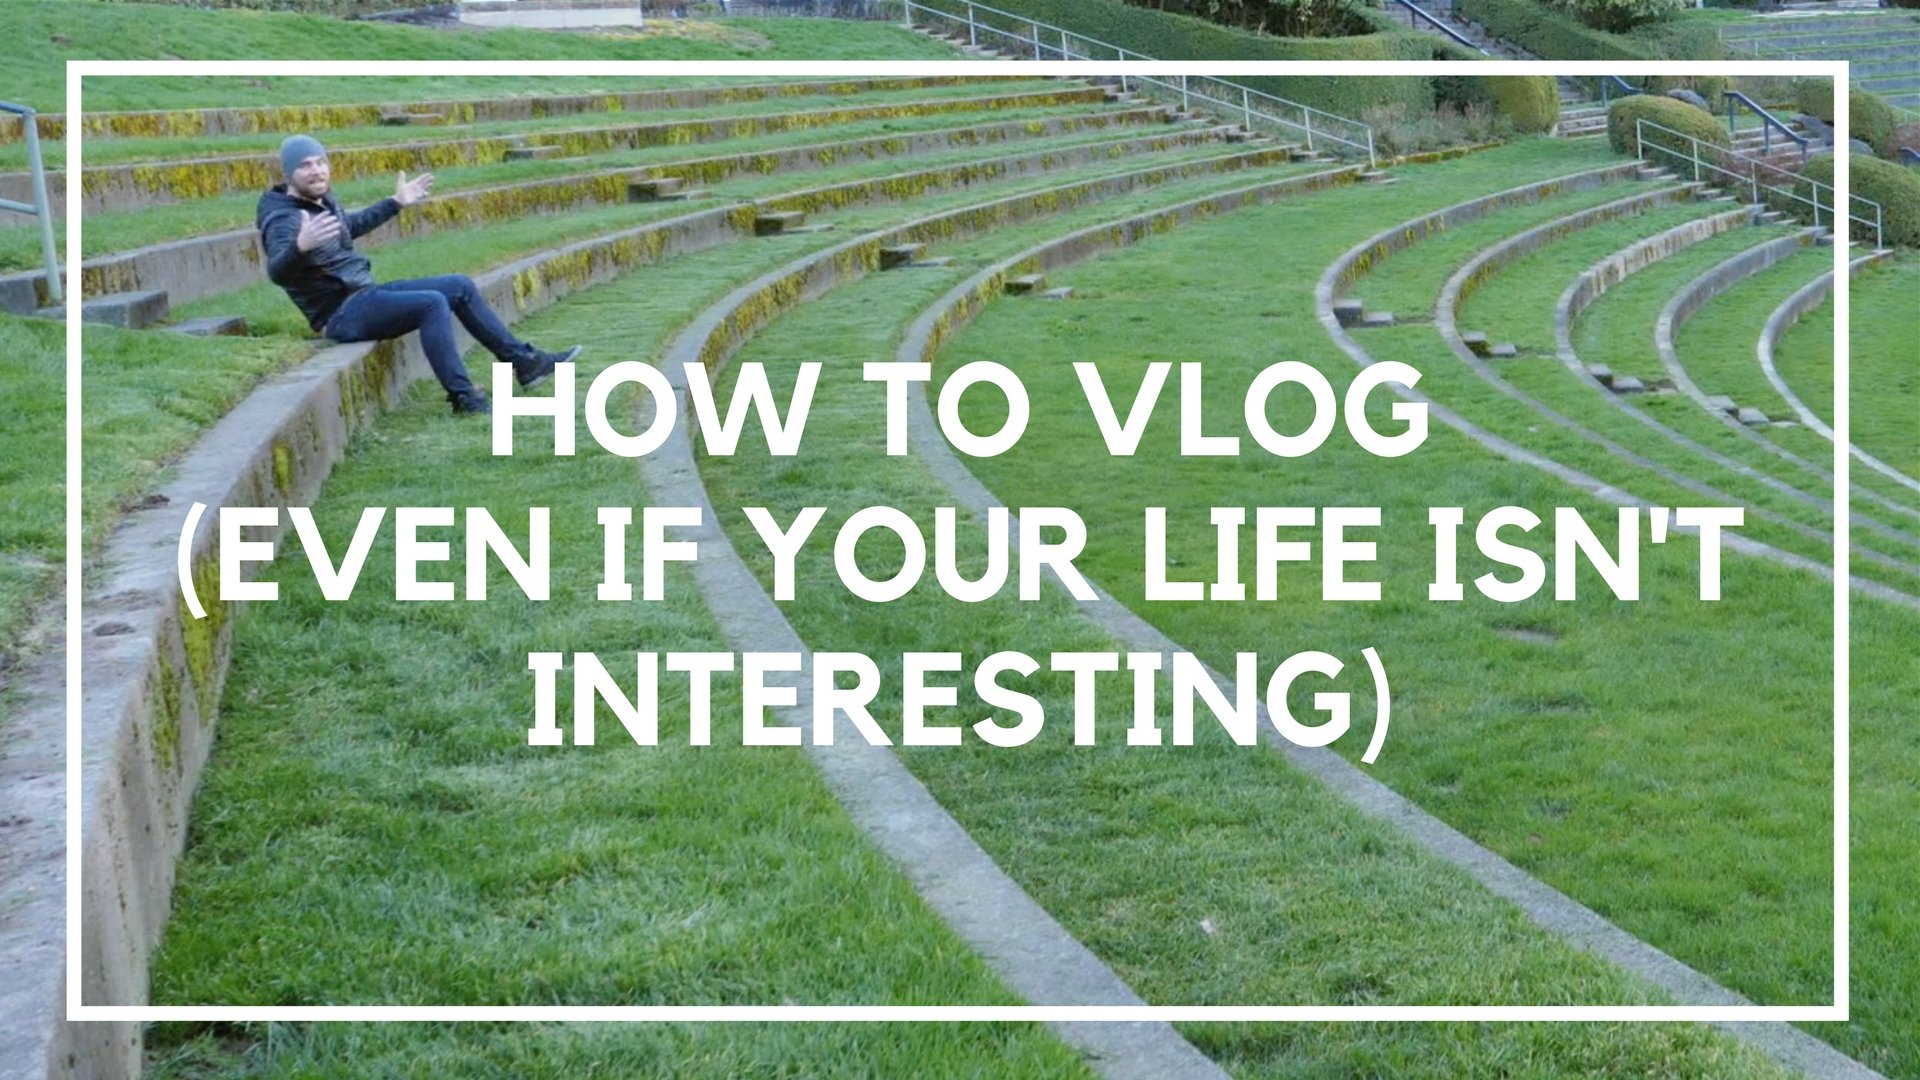 How to Vlog (Even If Your Life Isn’t that Interesting)